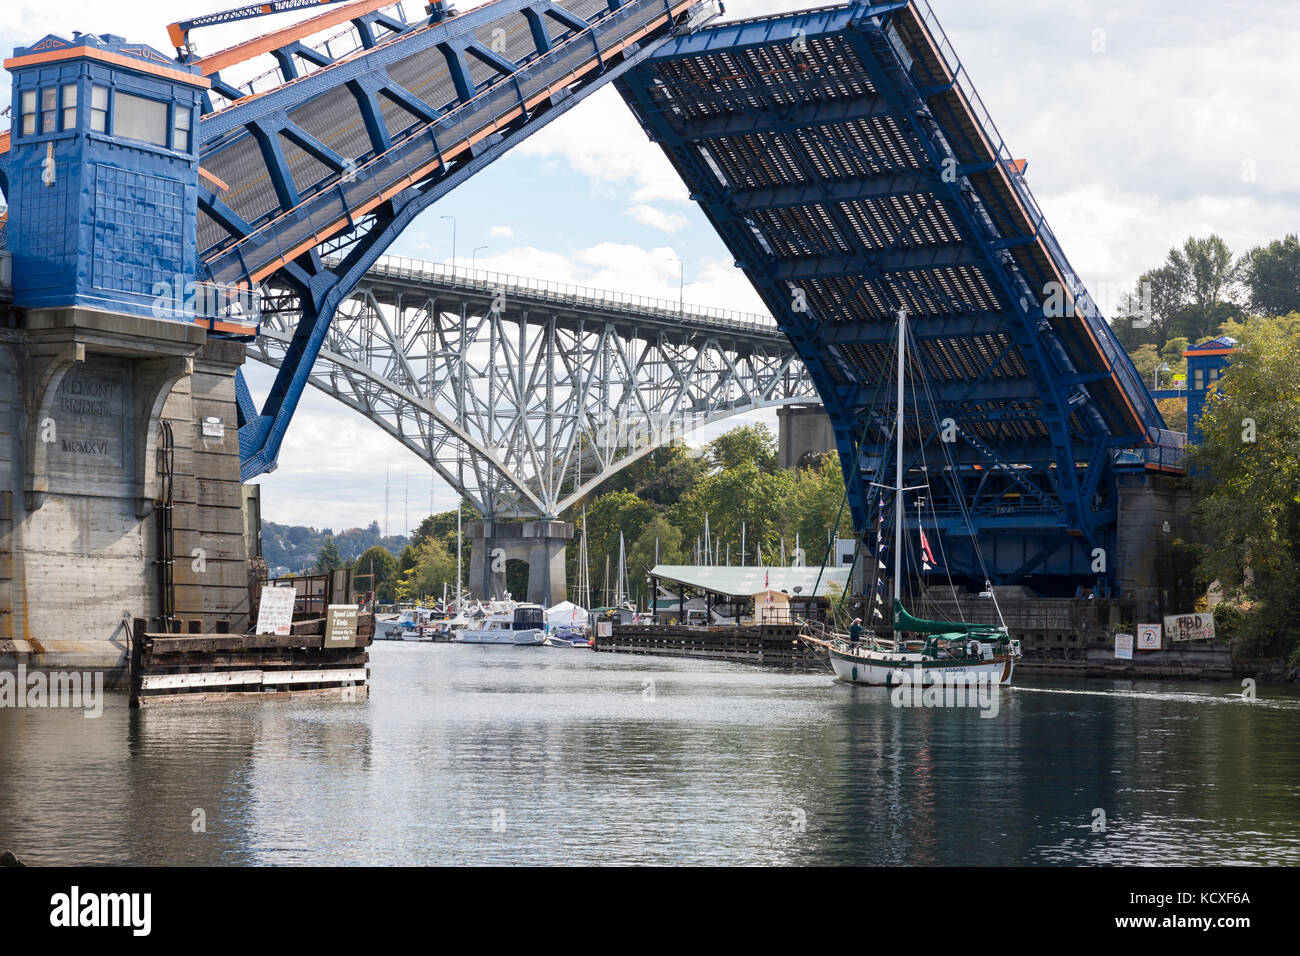 Seattle, Washington: The Fremont Bridge opens for a sailboat to pass. The double-leaf bascule bridge connects Seattle's Fremont and Queen Ann neighbor Stock Photo